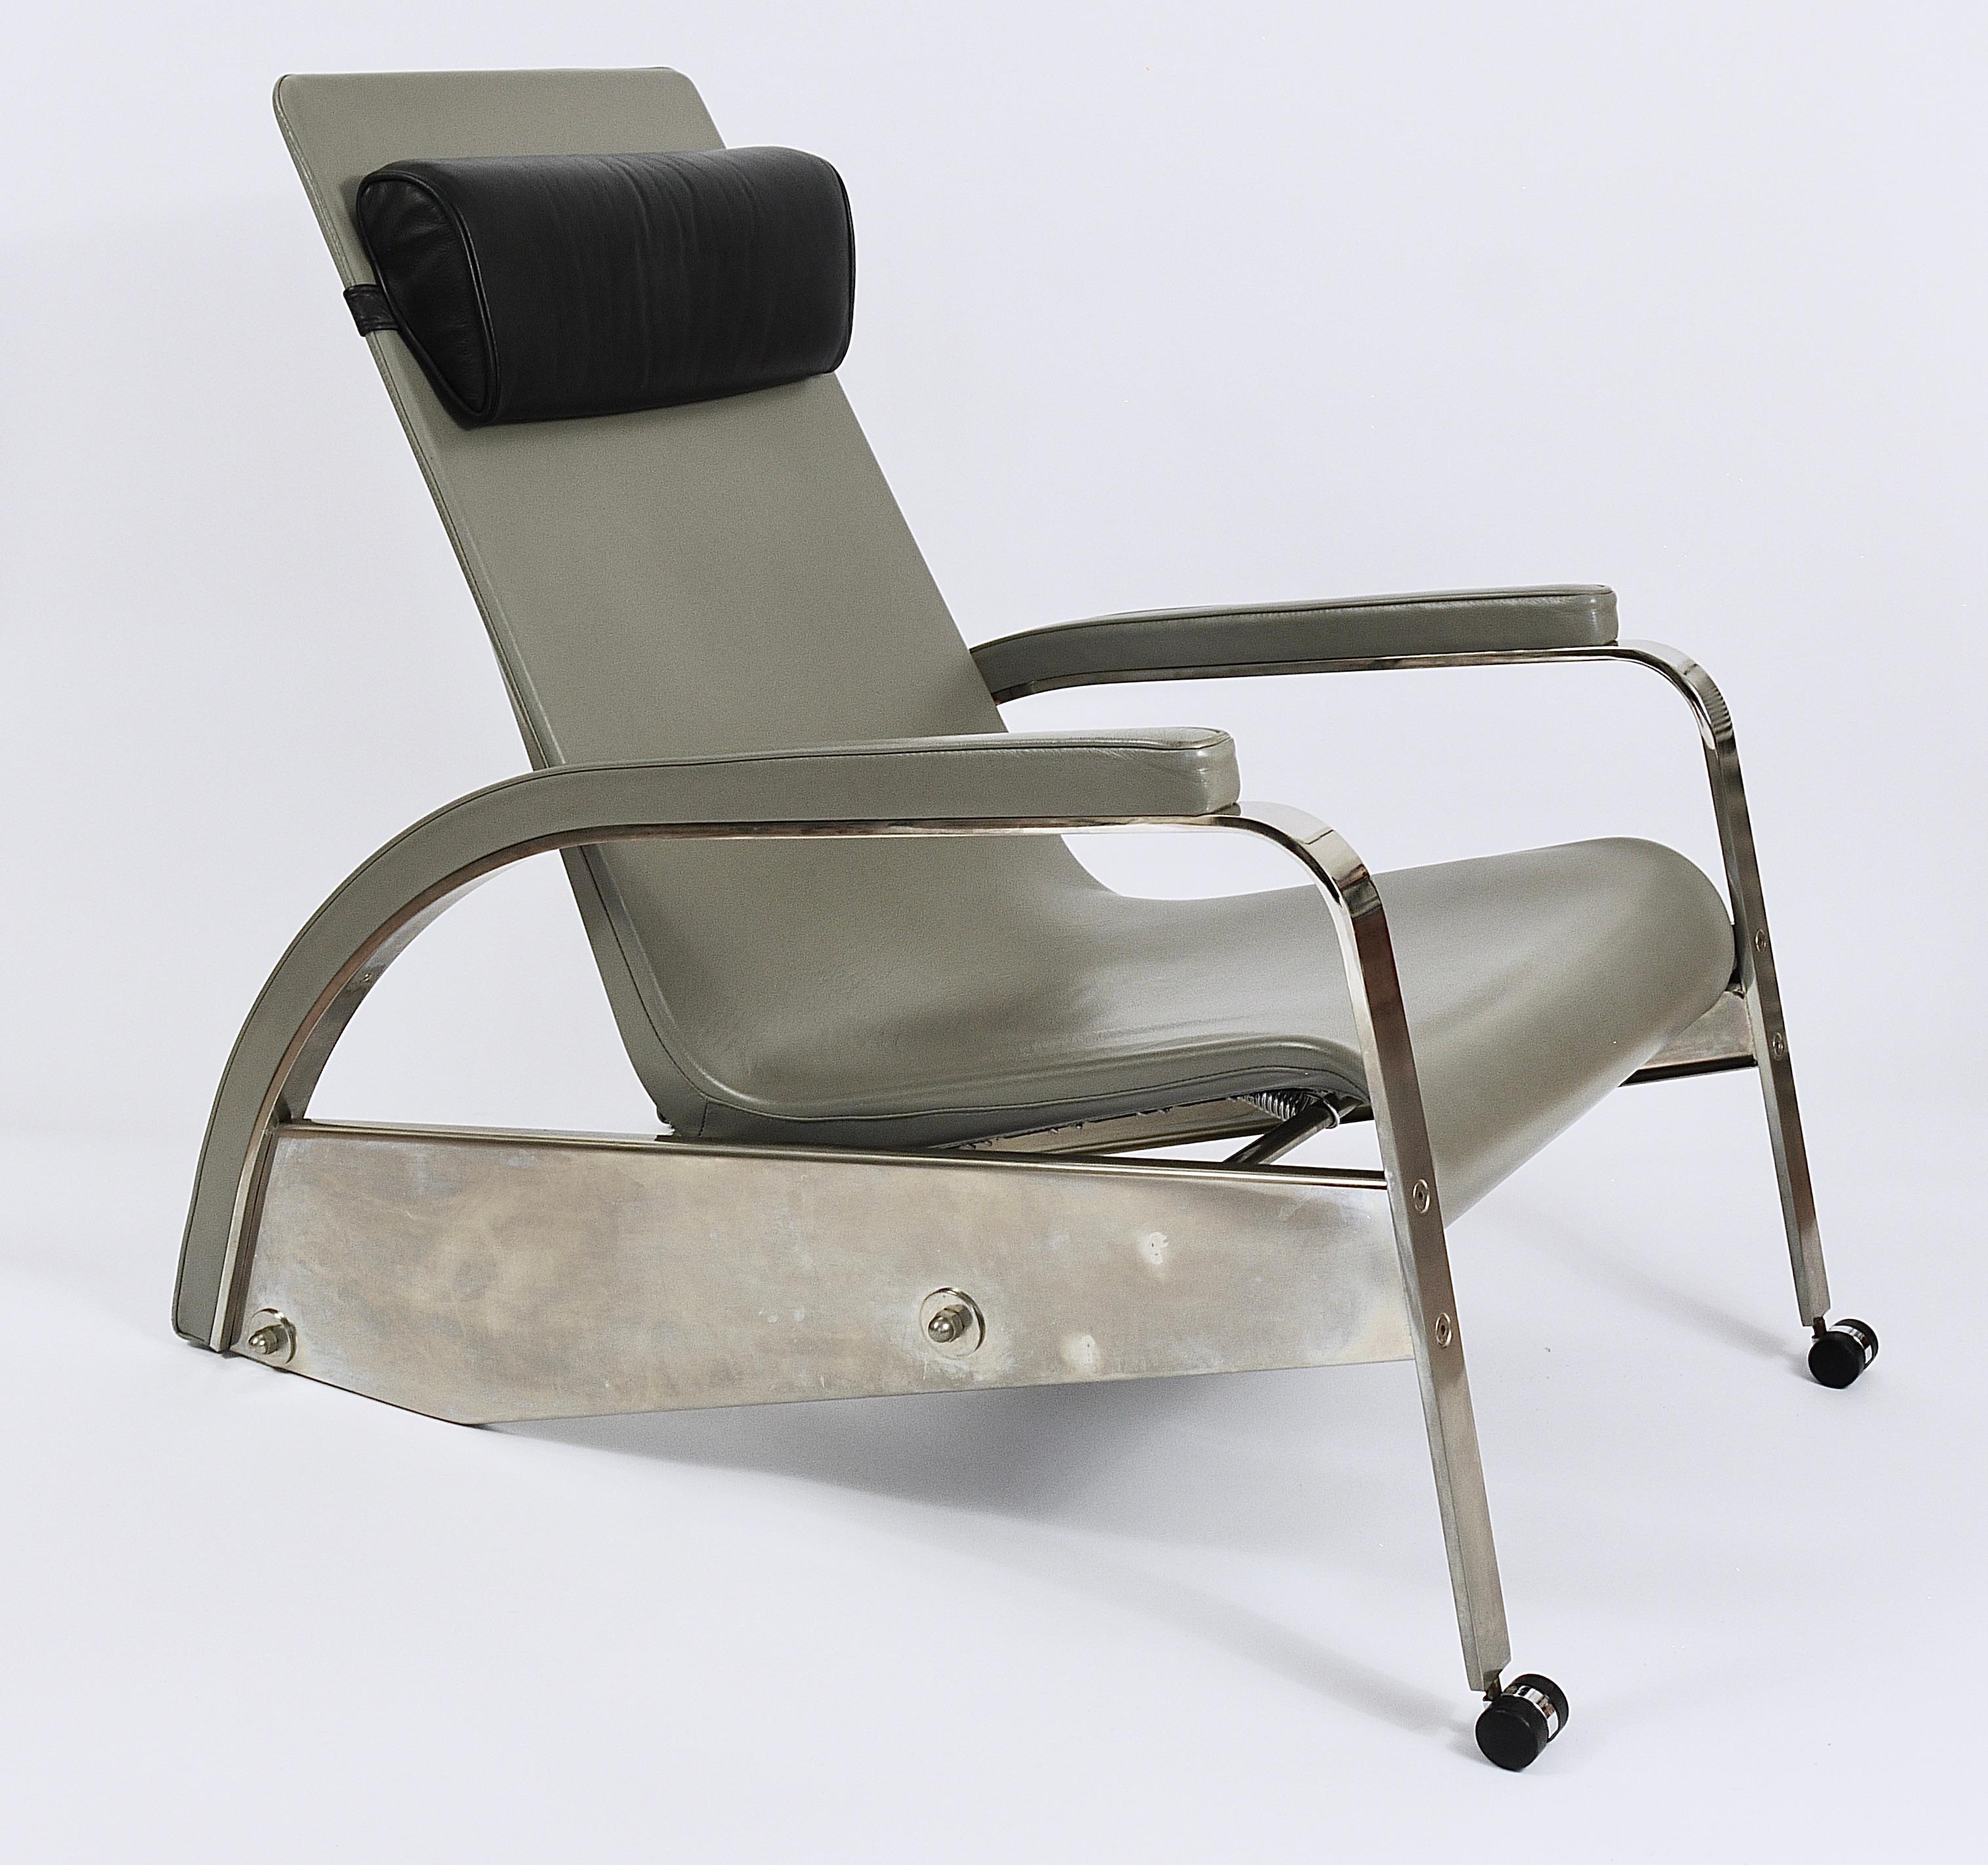 Bauhaus Jean Prouvé Grand Repos 1920s Design Limited Chair D80 by Tecta Germany, 1980s